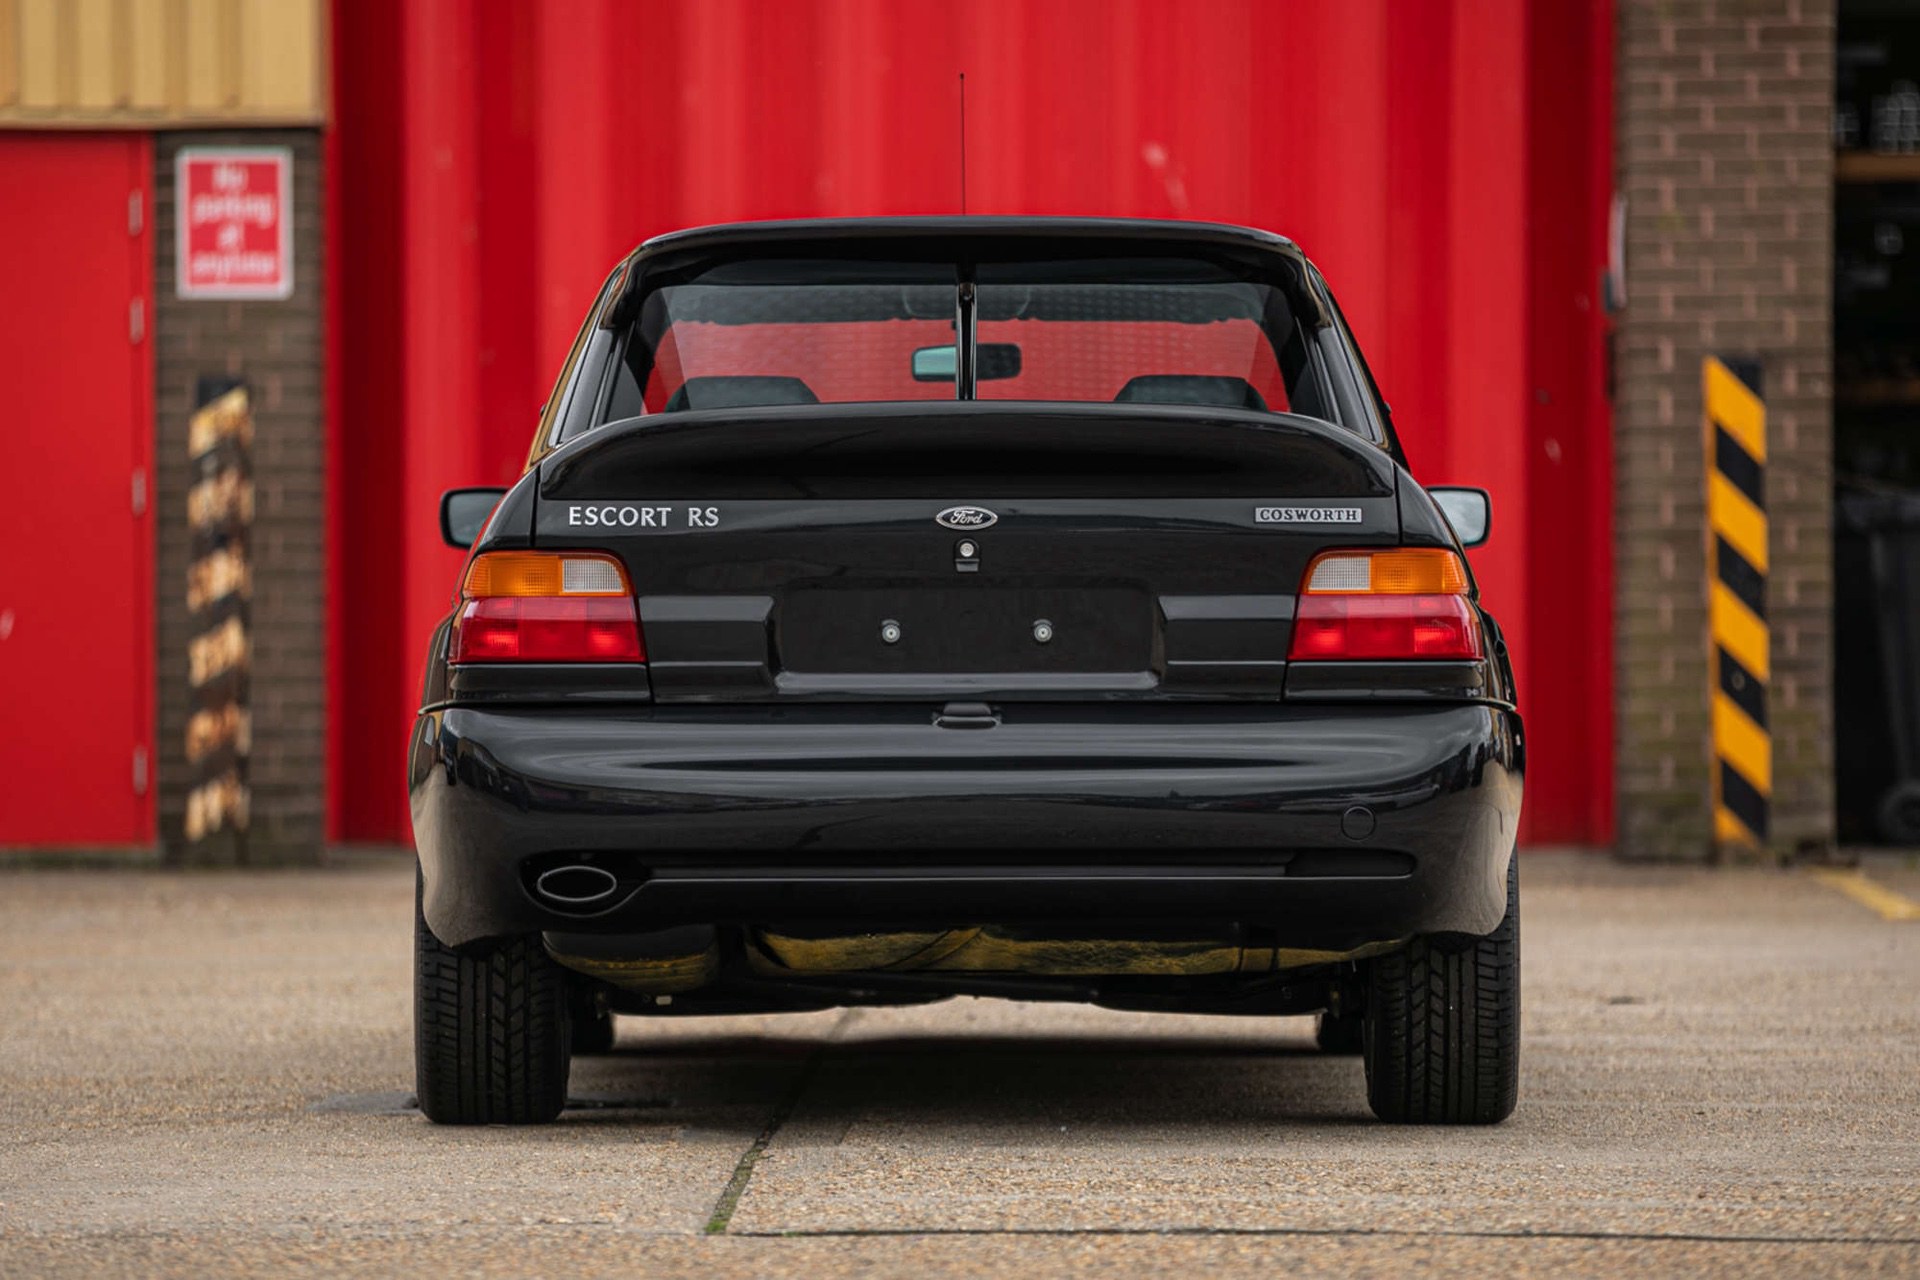 1996_Ford_Escort_RS_Cosworth_blacj_auction-11